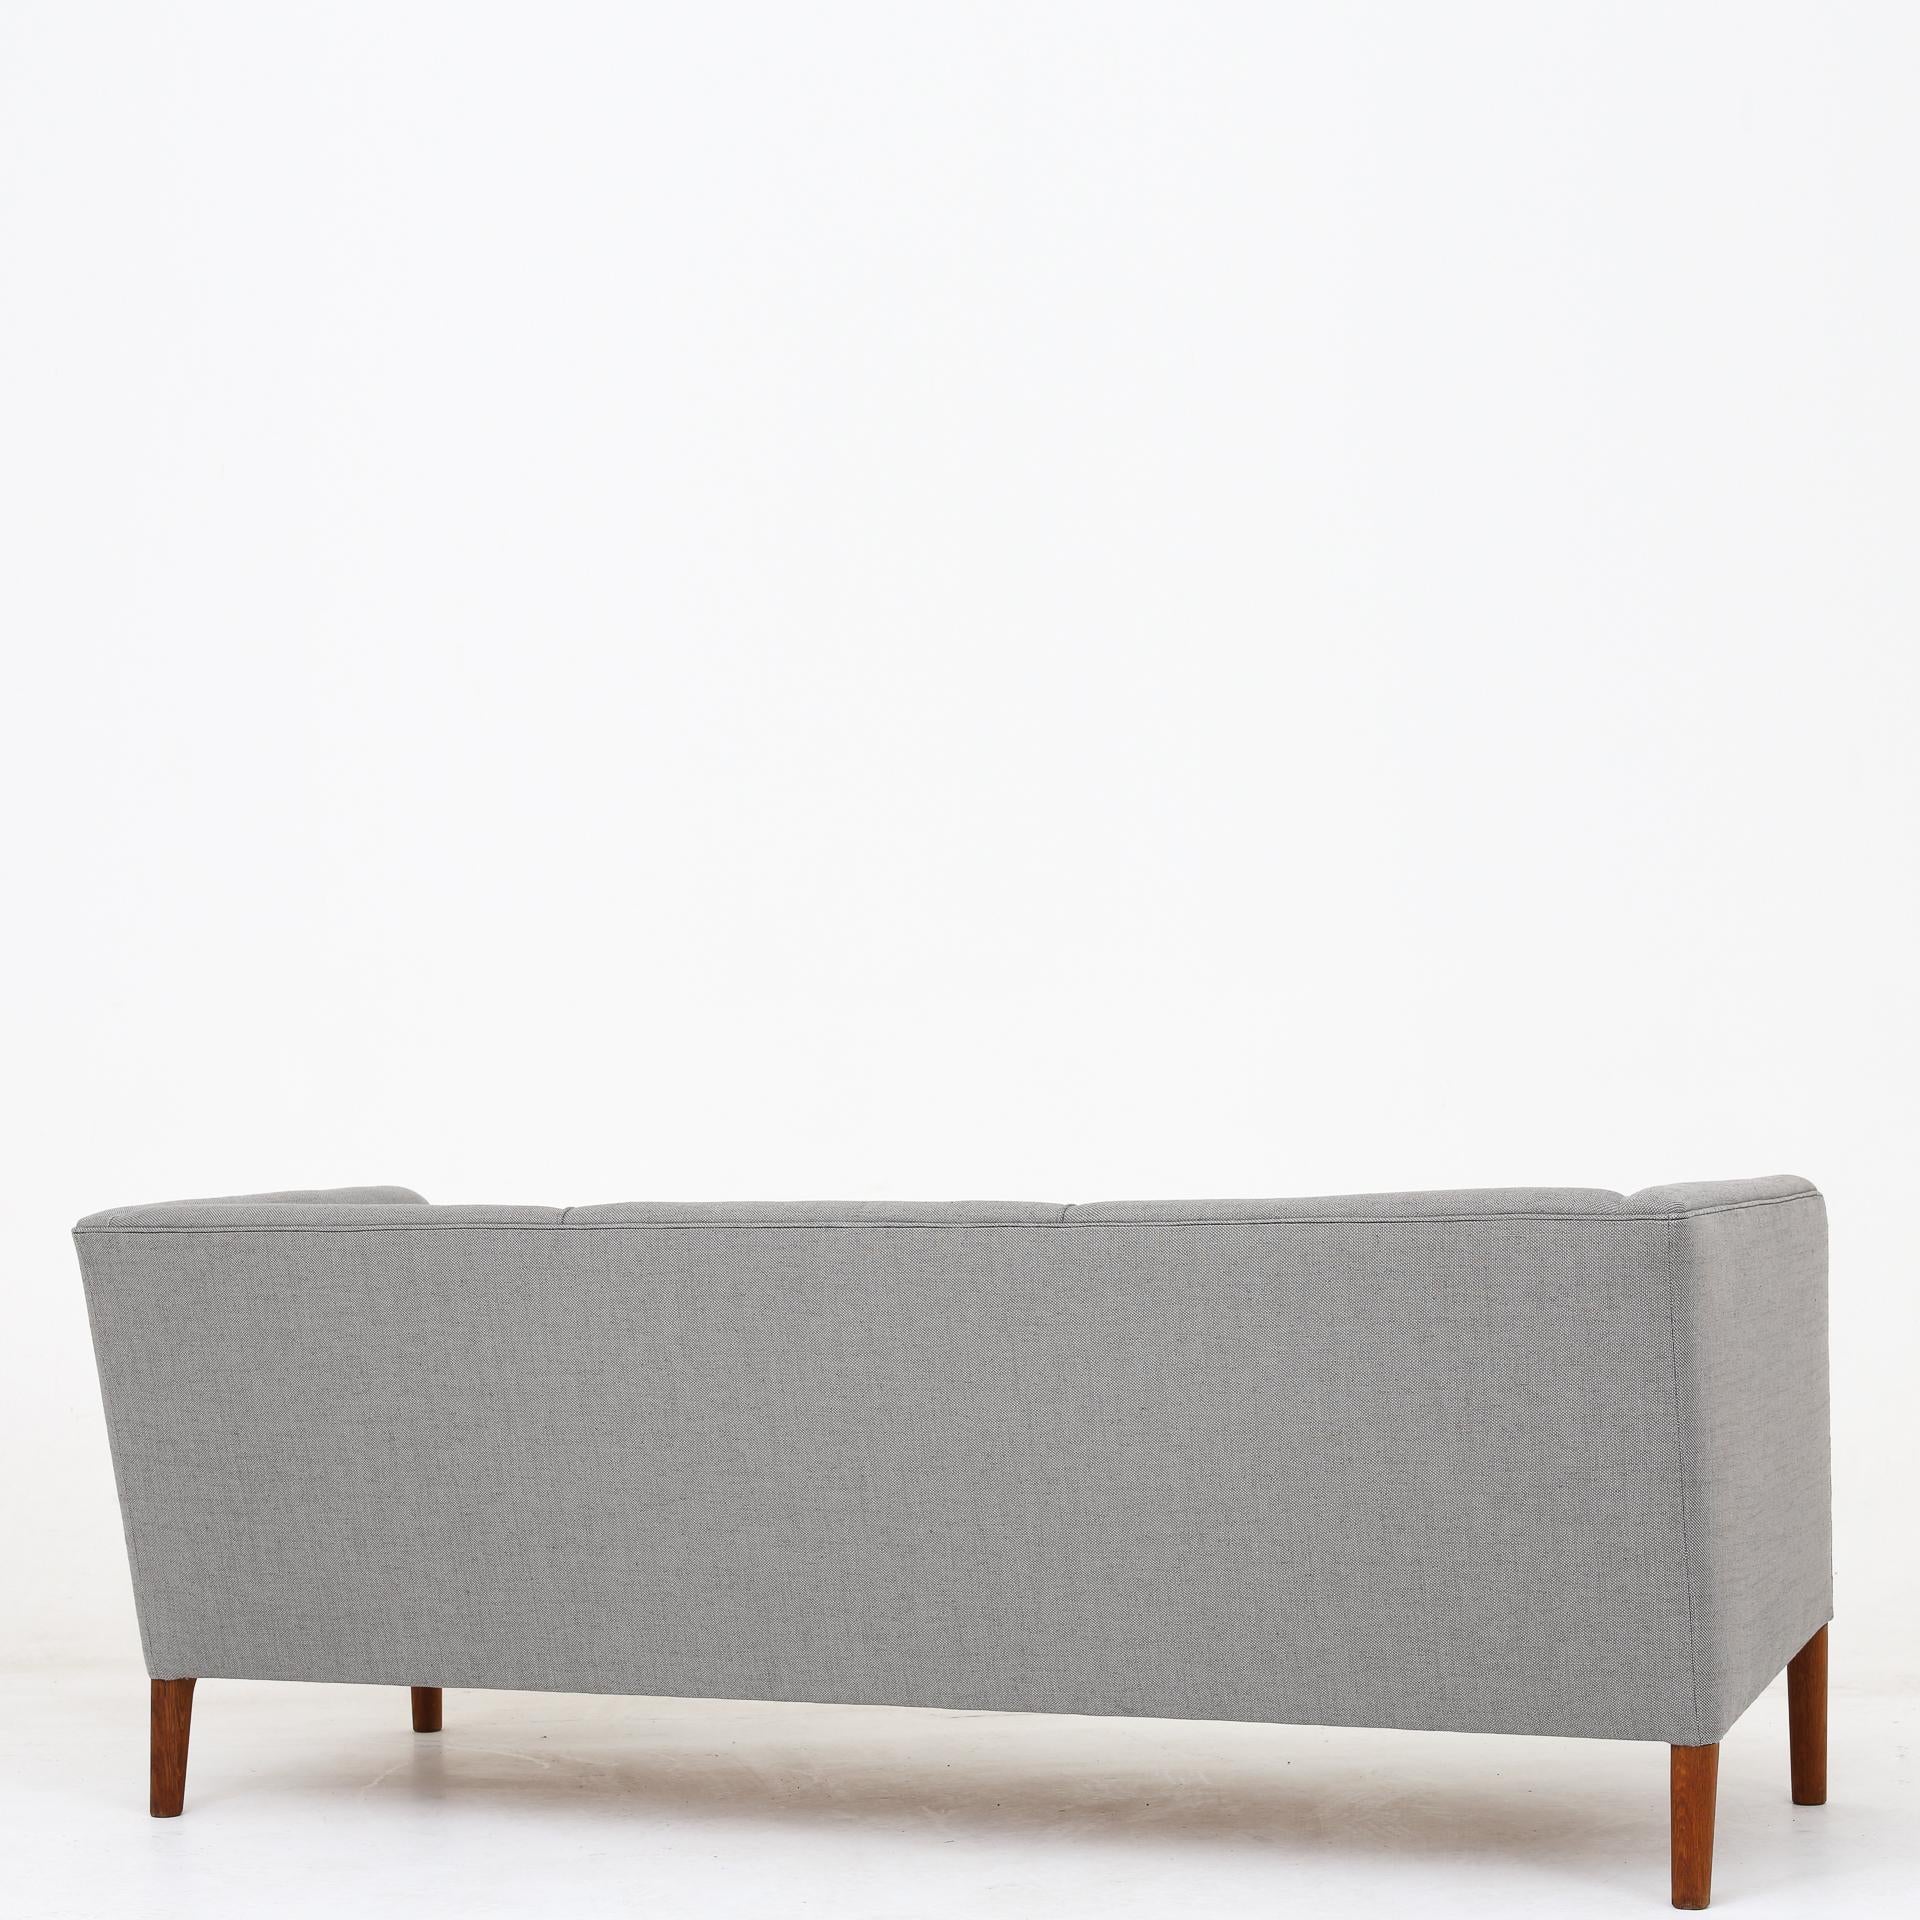 AP 18S - 3-seater sofa, reupholstered in new textile (Sunniva 3, colour code 153) and legs in patinated oak. Hans J. Wegner / AP Stolen.